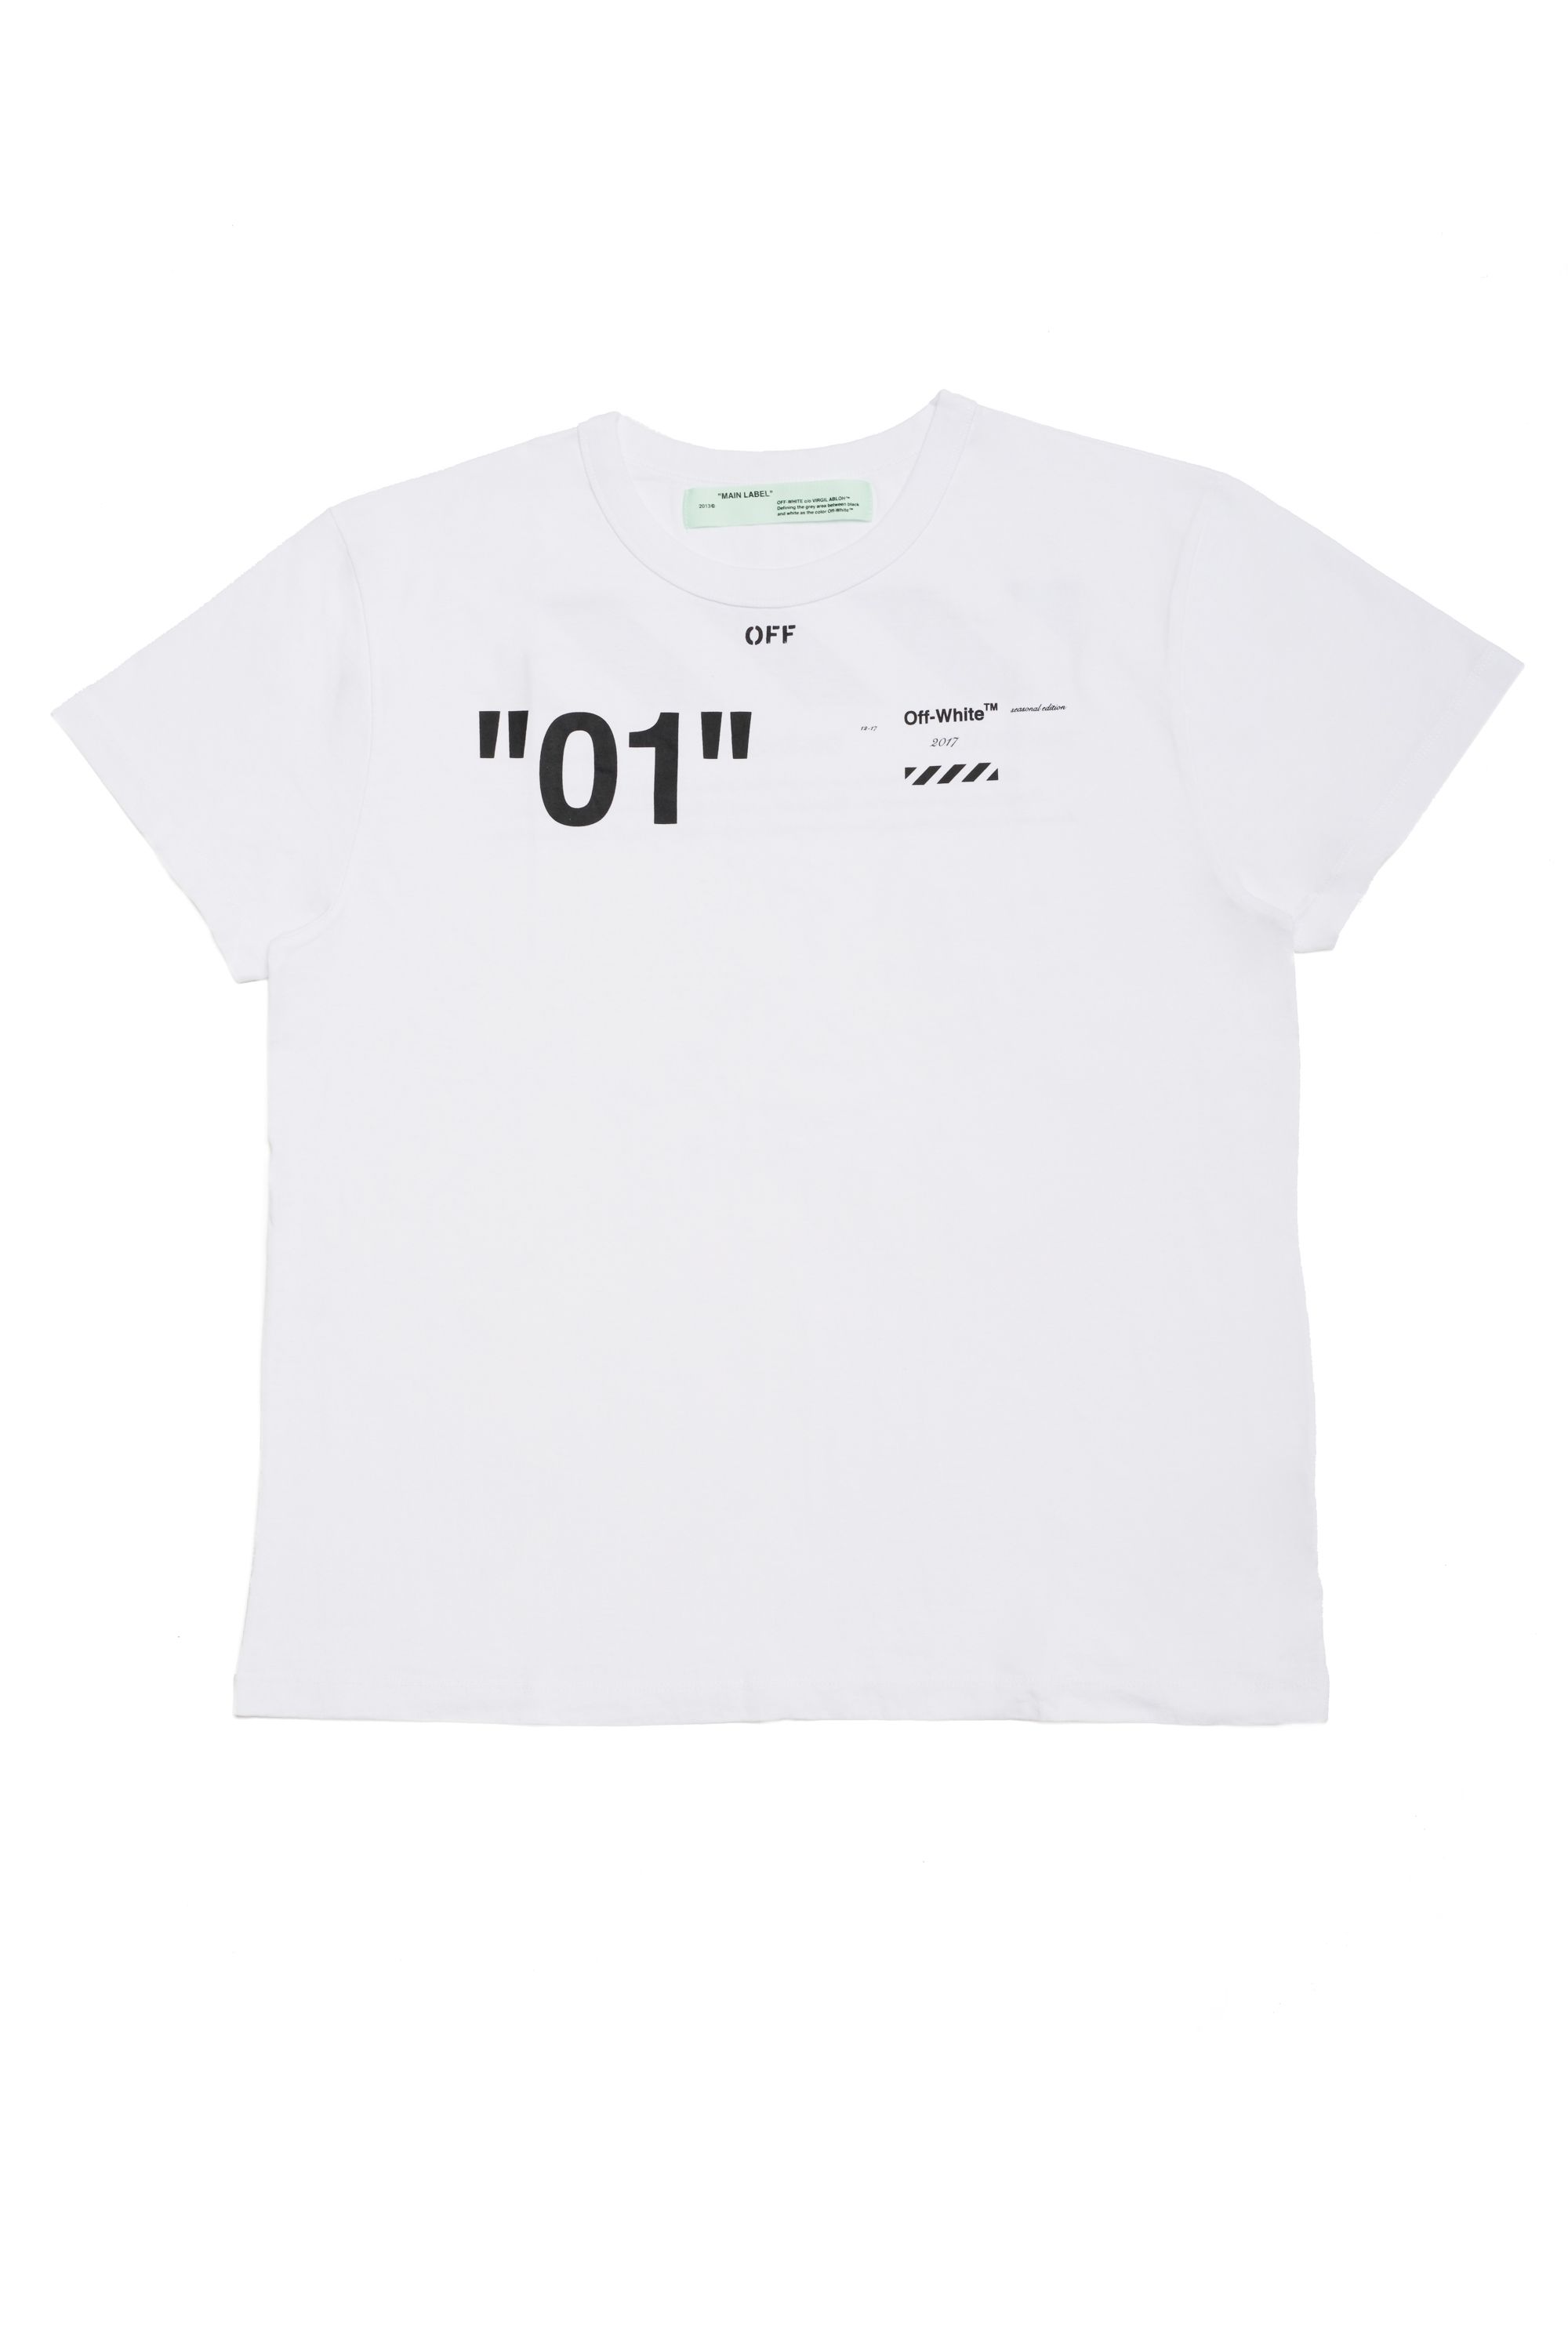 off white clothing brand sale Big sale - OFF 69%